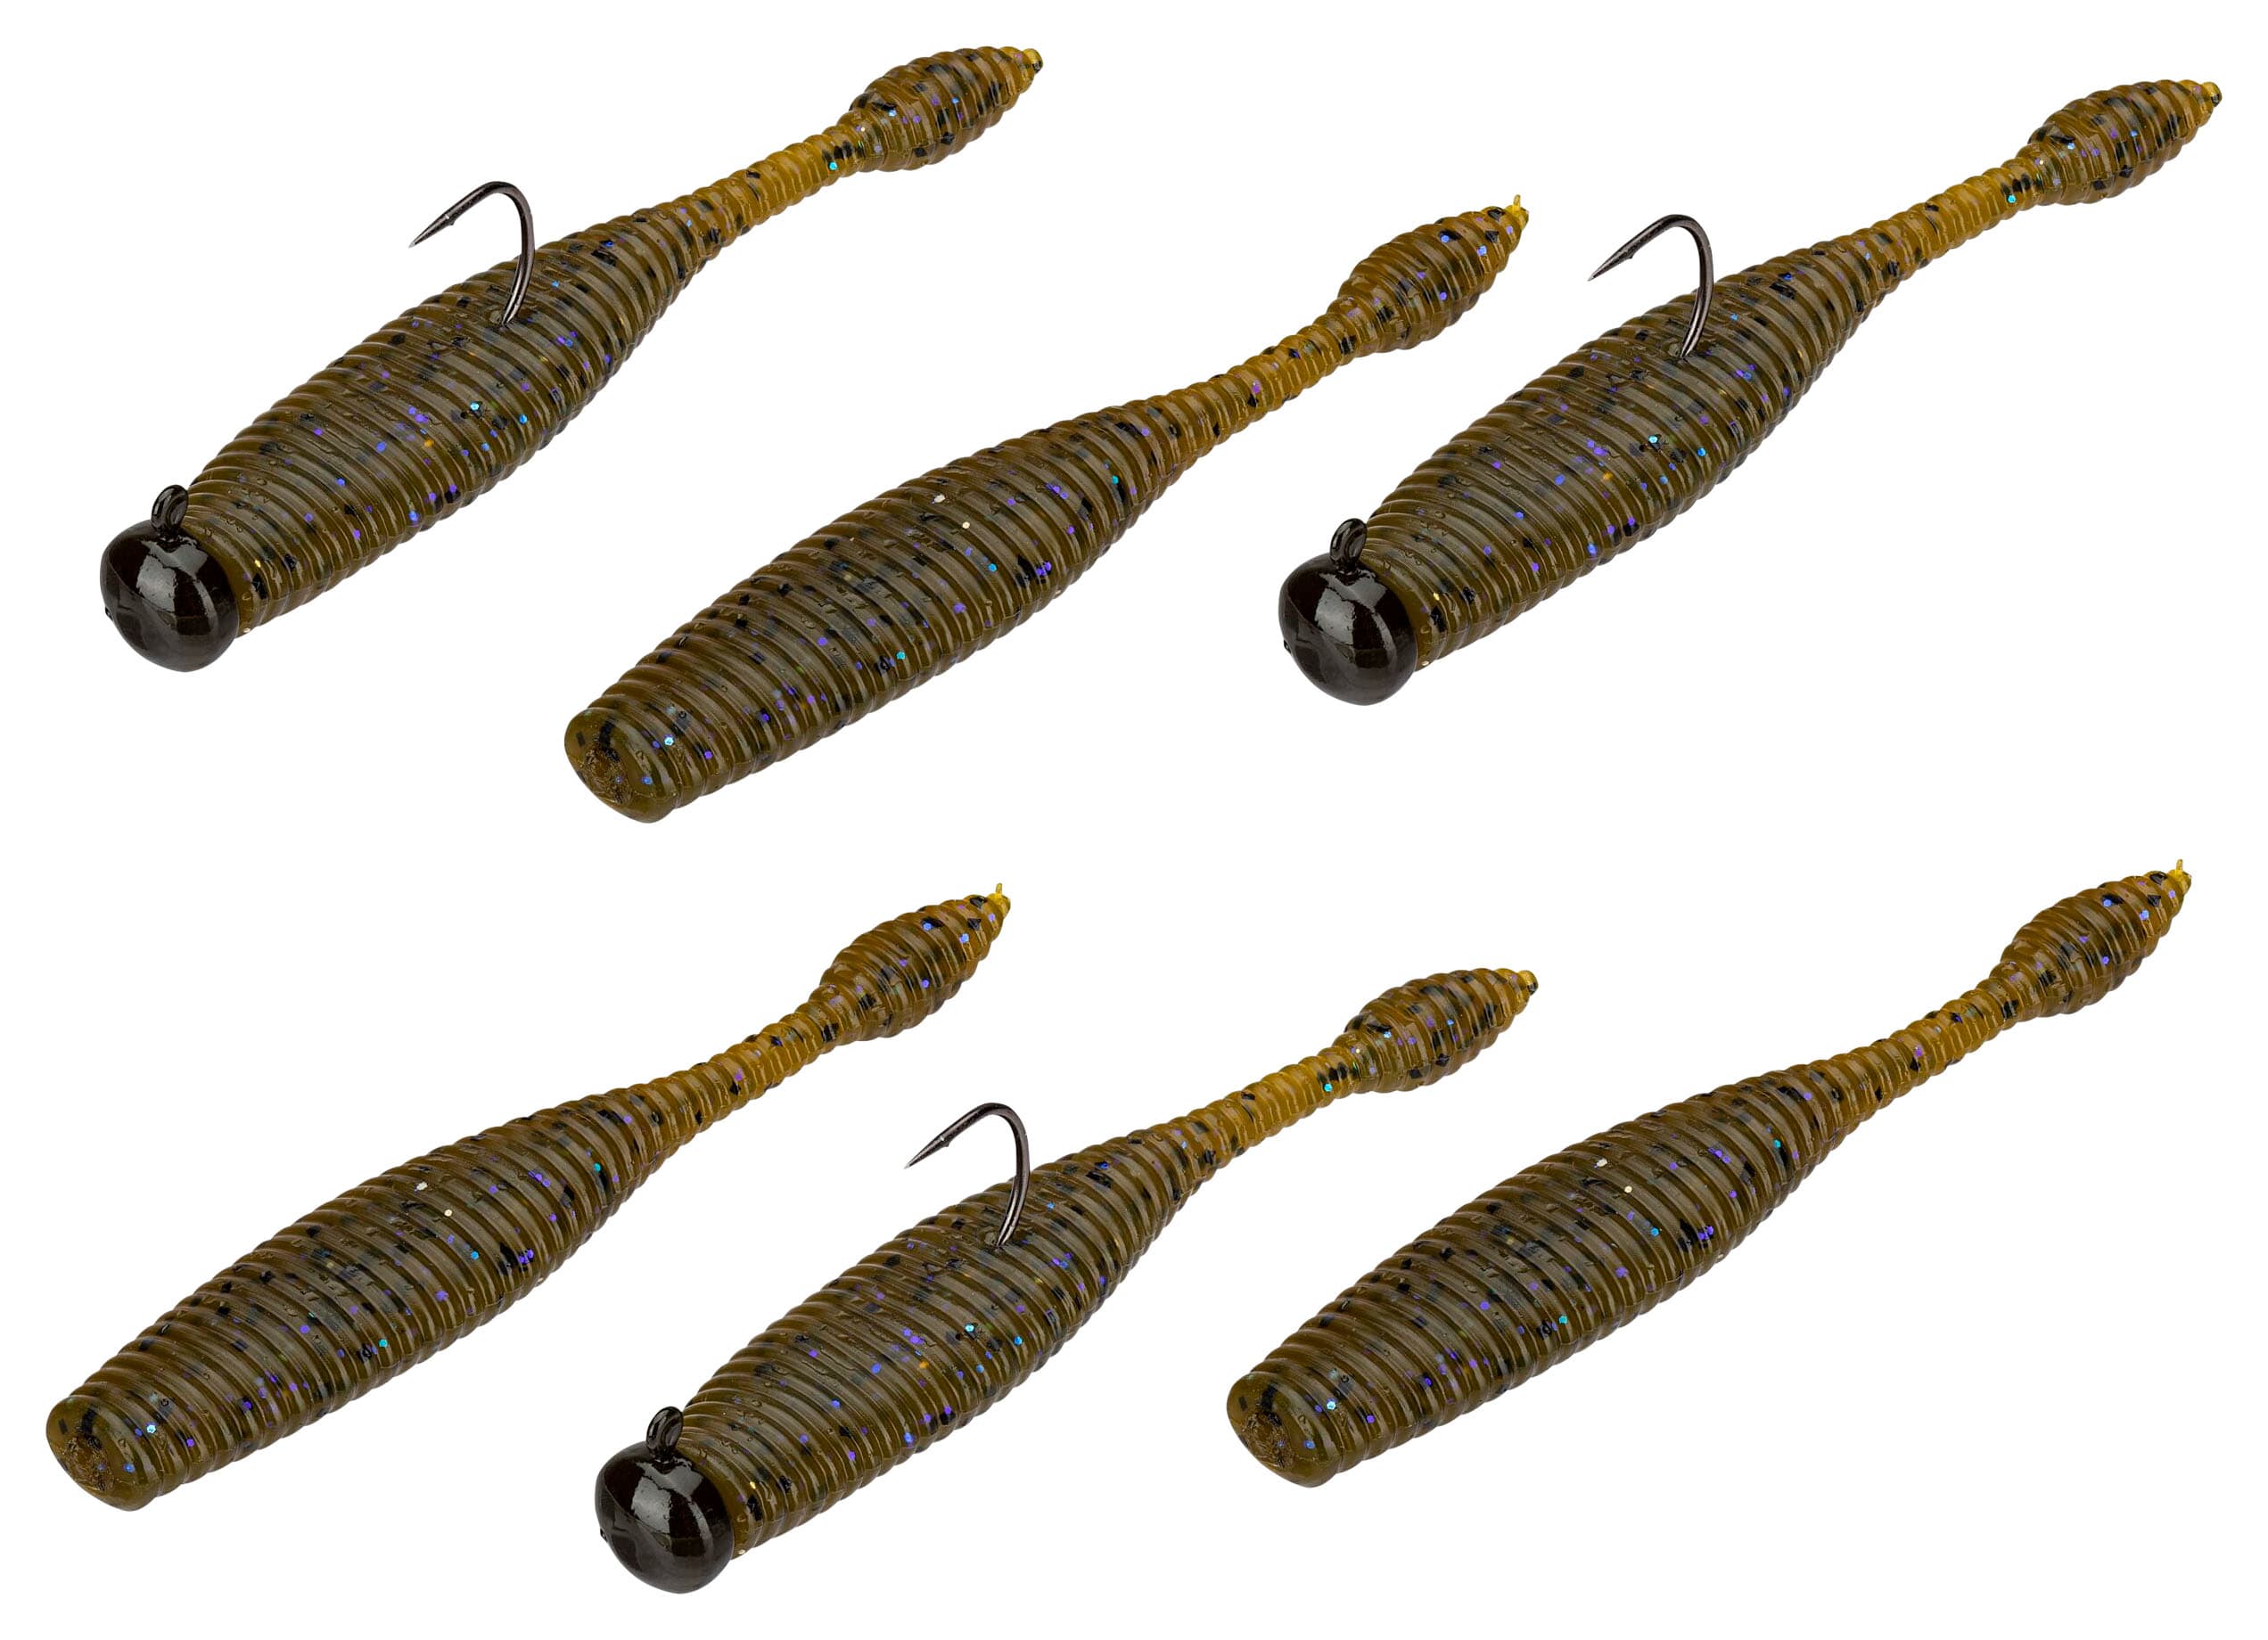 Perfection Lures® Ned Rig Kit